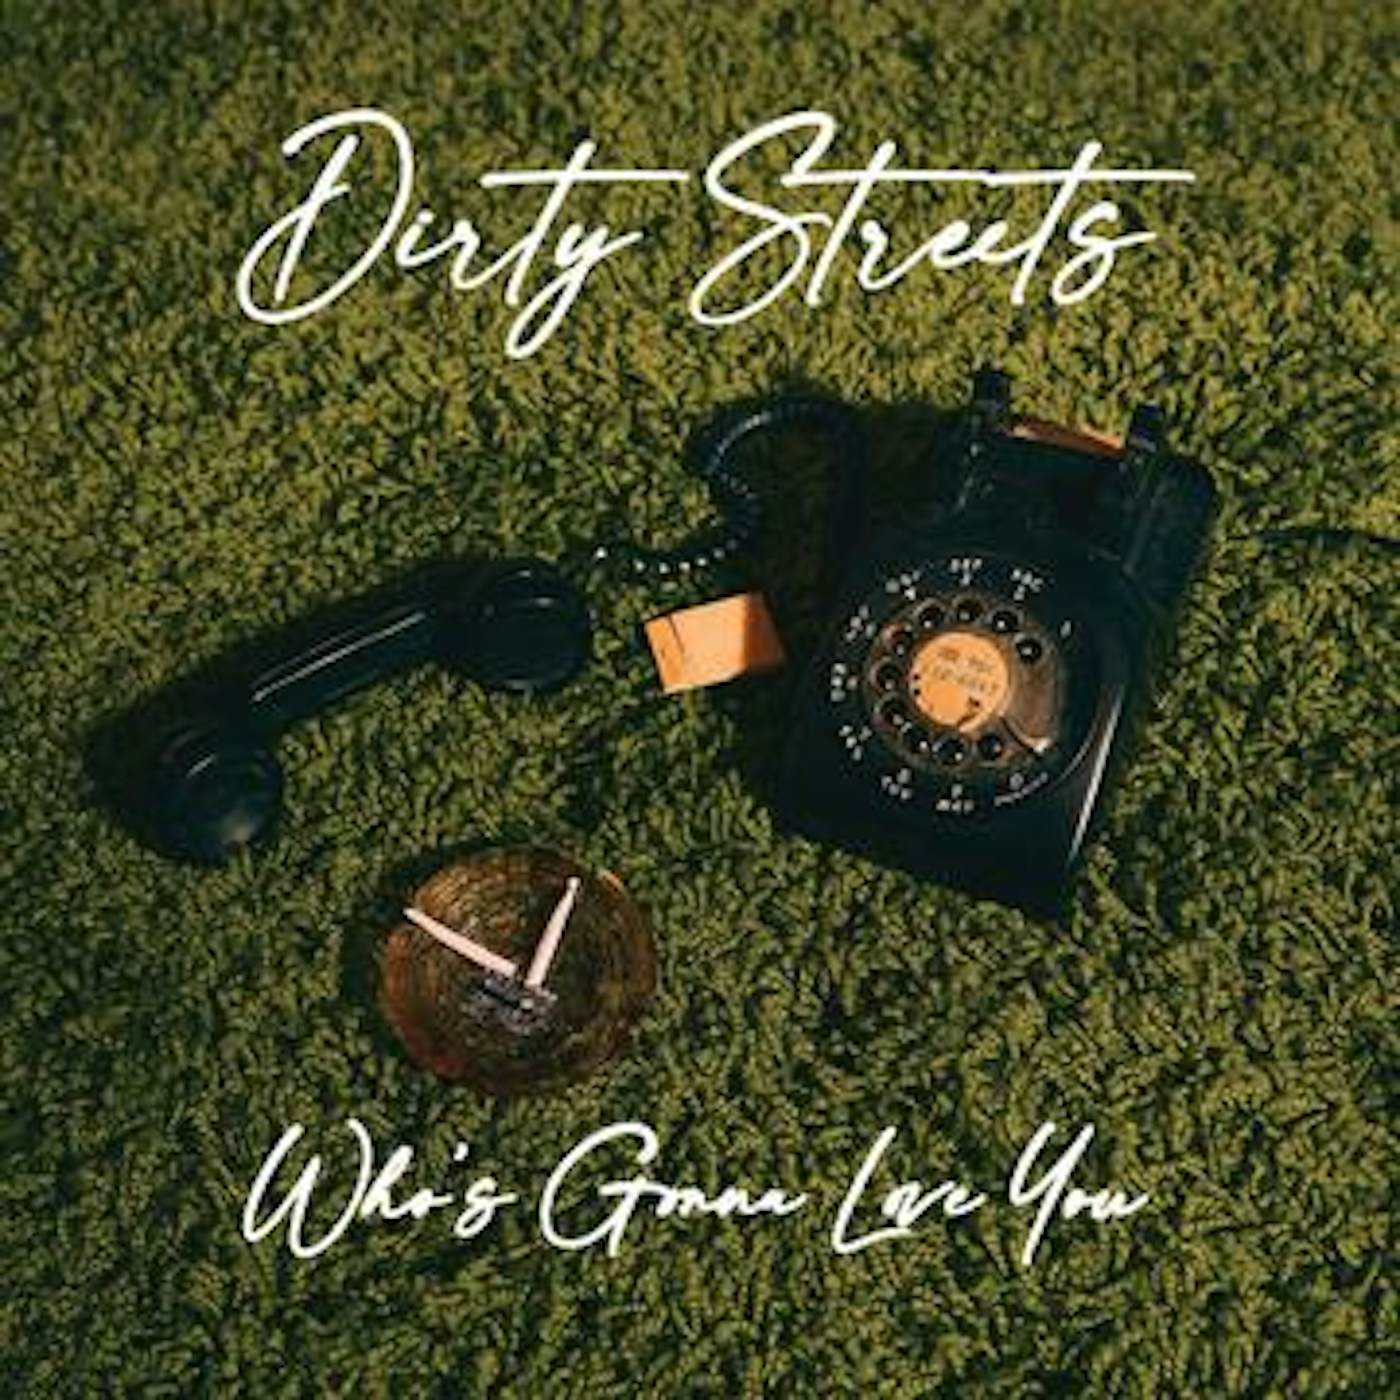 Dirty Streets WHO'S GONNA LOVE YOU CD